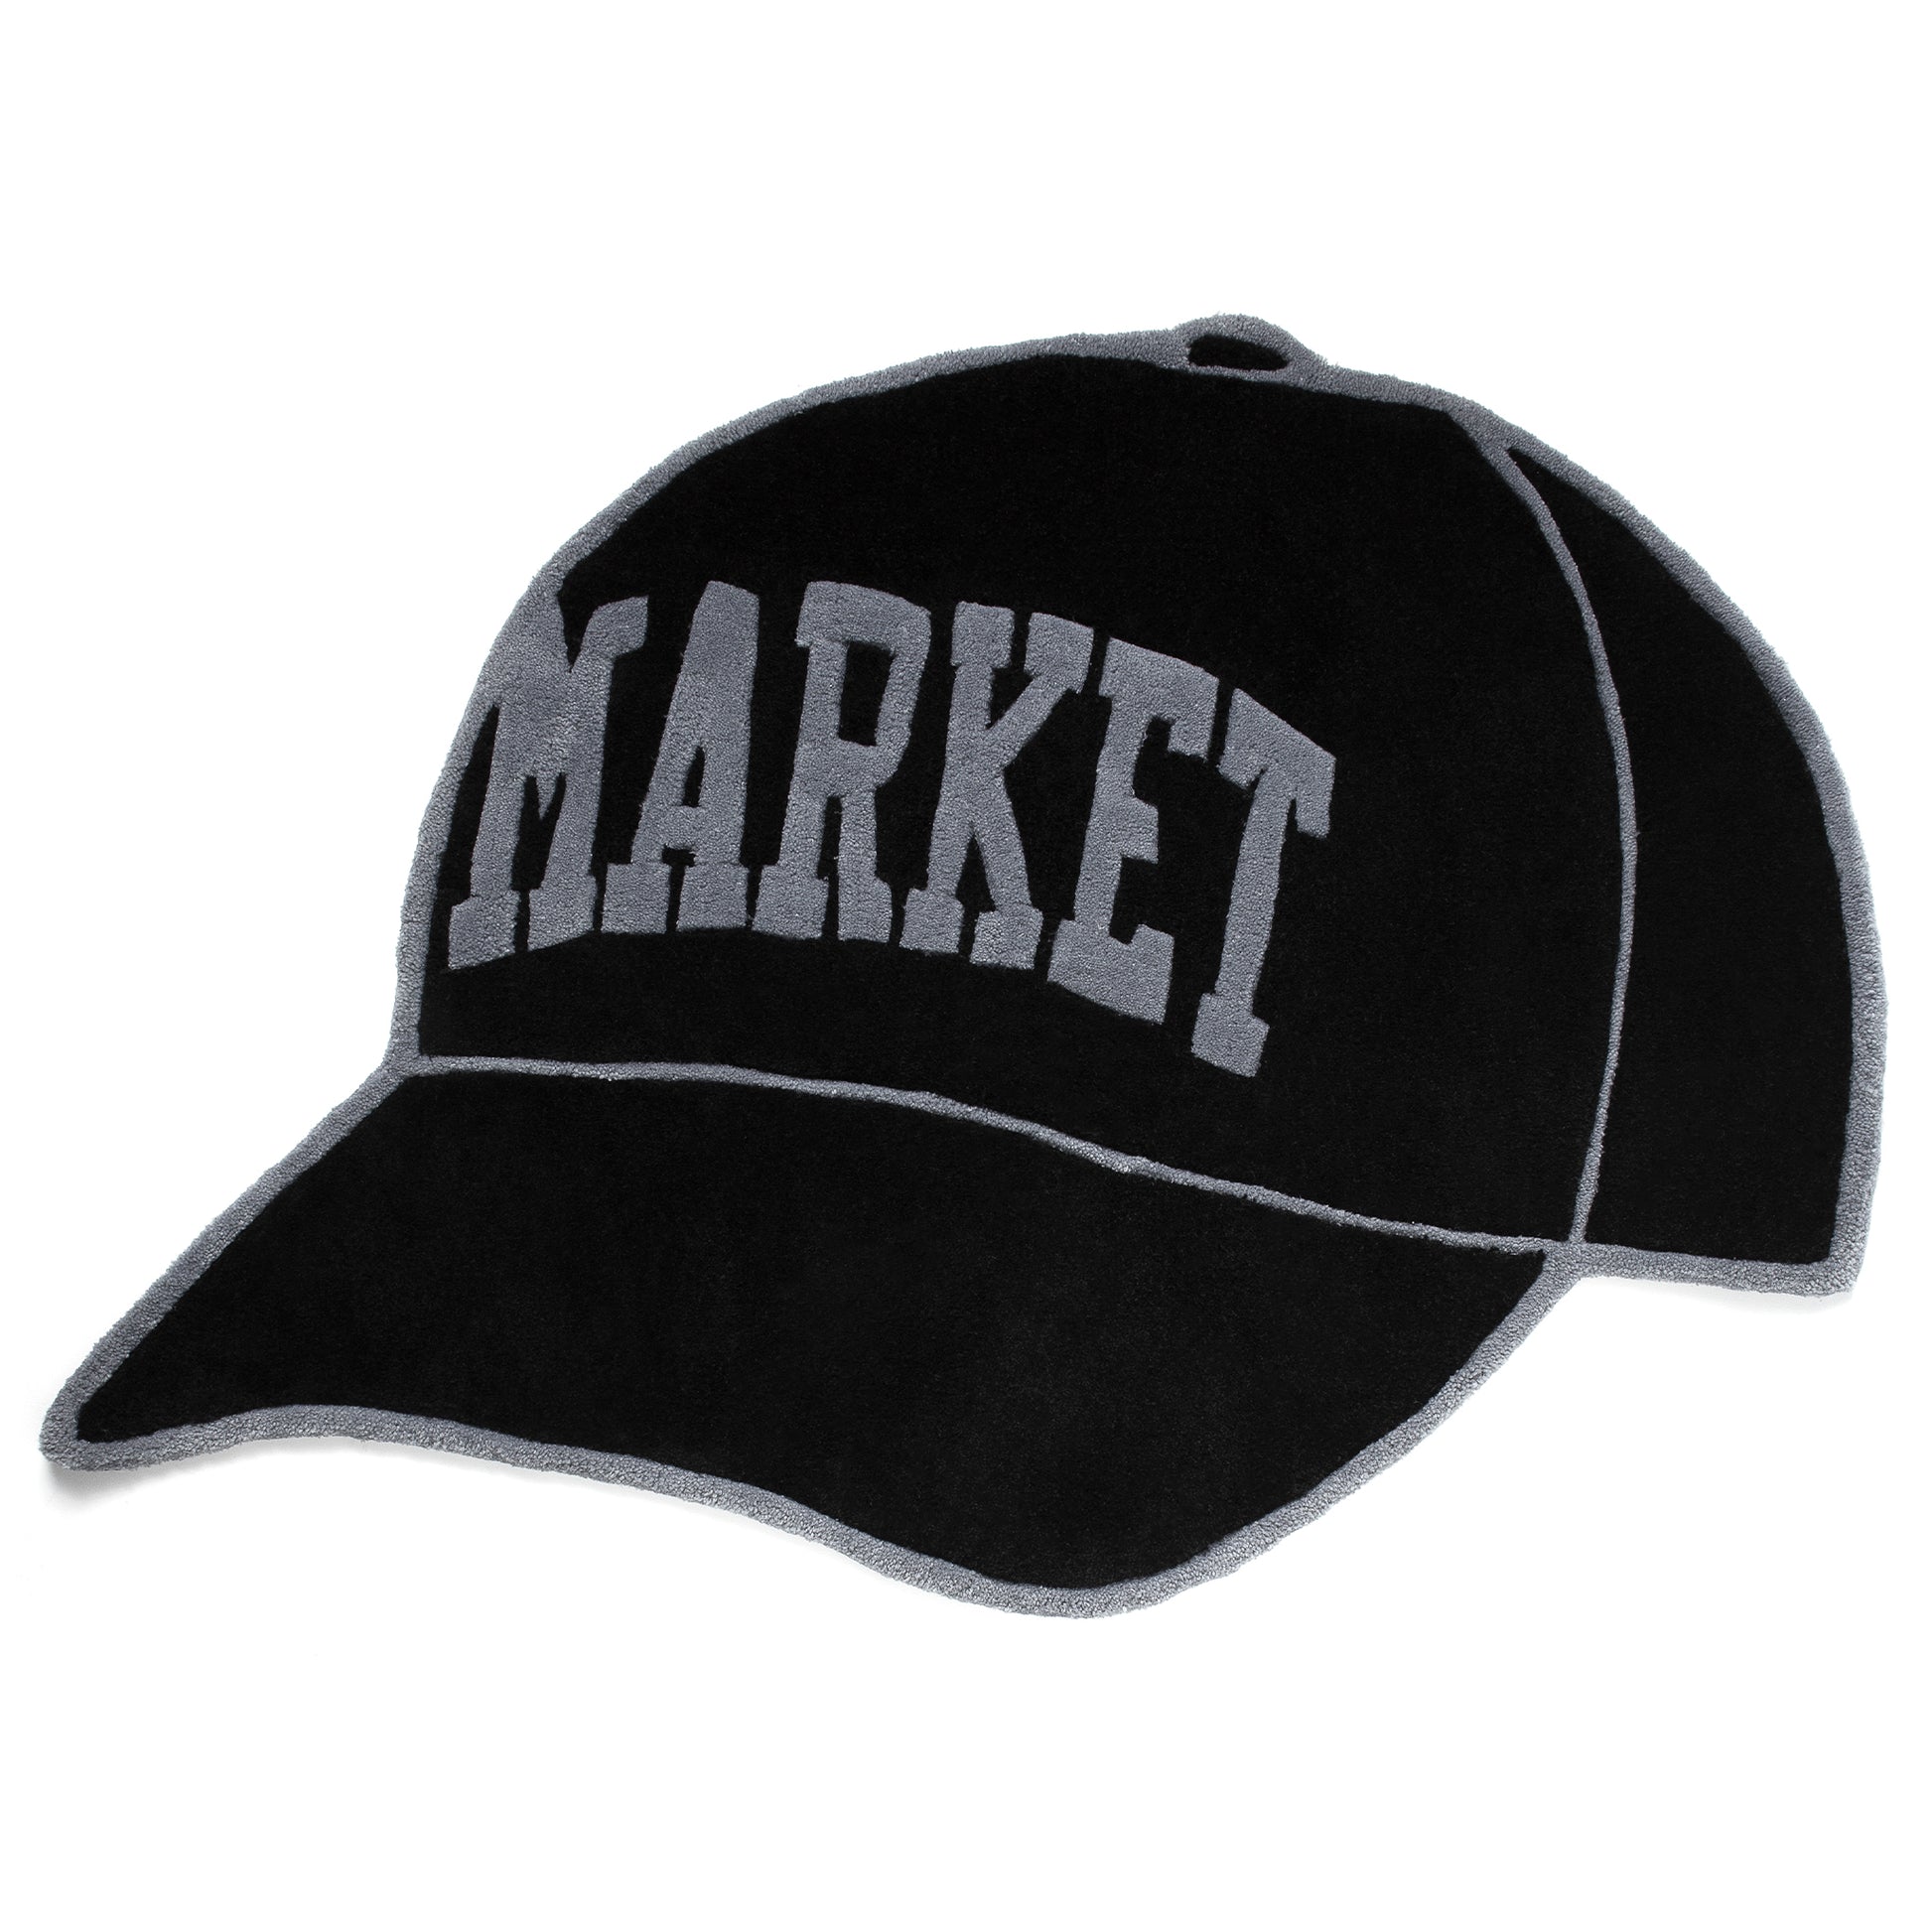 MARKET clothing brand MARKET HAT RUG. Find more homegoods and graphic tees at MarketStudios.com. Formally Chinatown Market. 